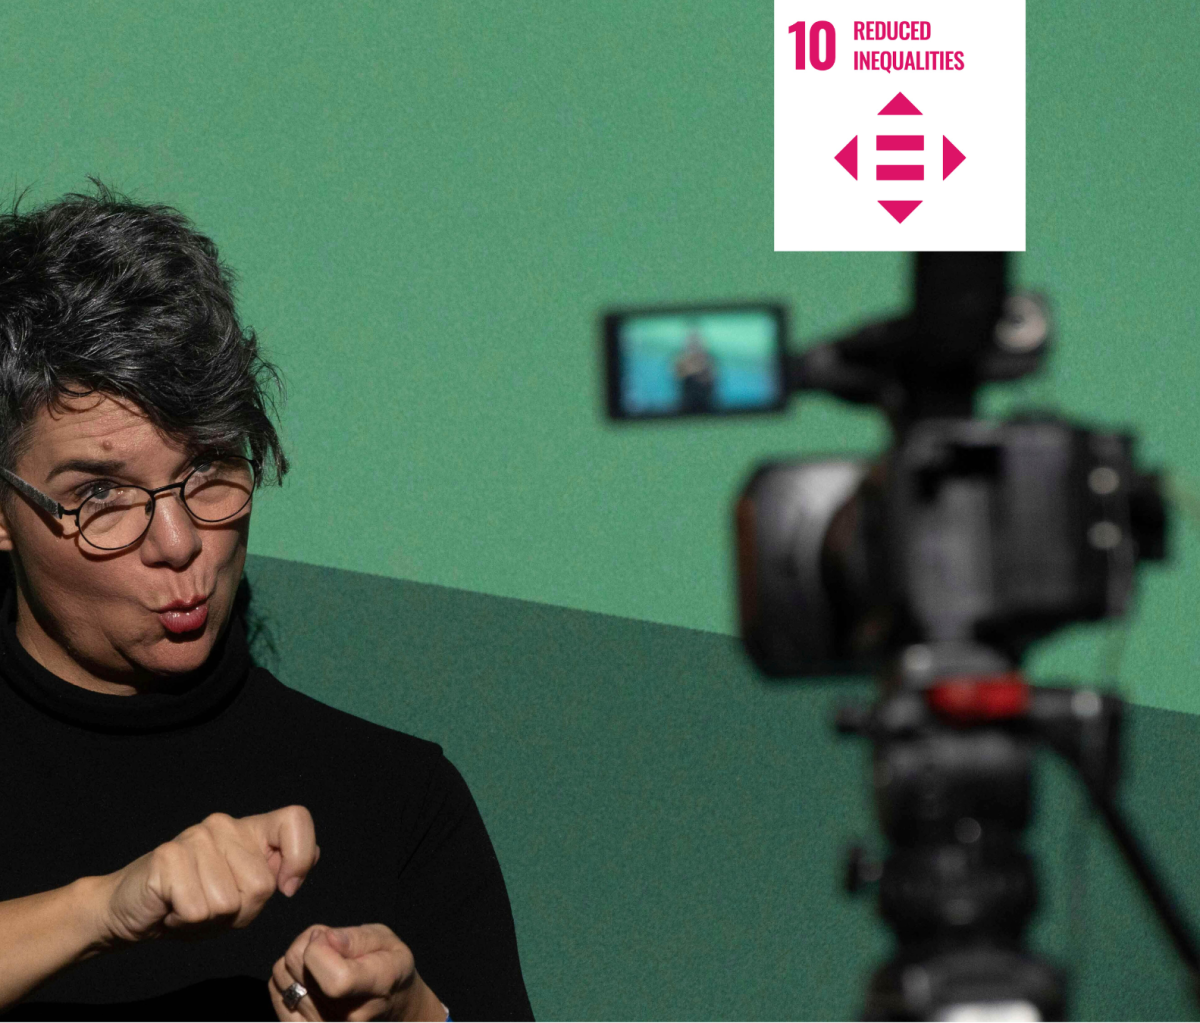 Shows a woman communicating in sign language as a camera films her with a white icon signifying UN Sustainable Development Goal ten